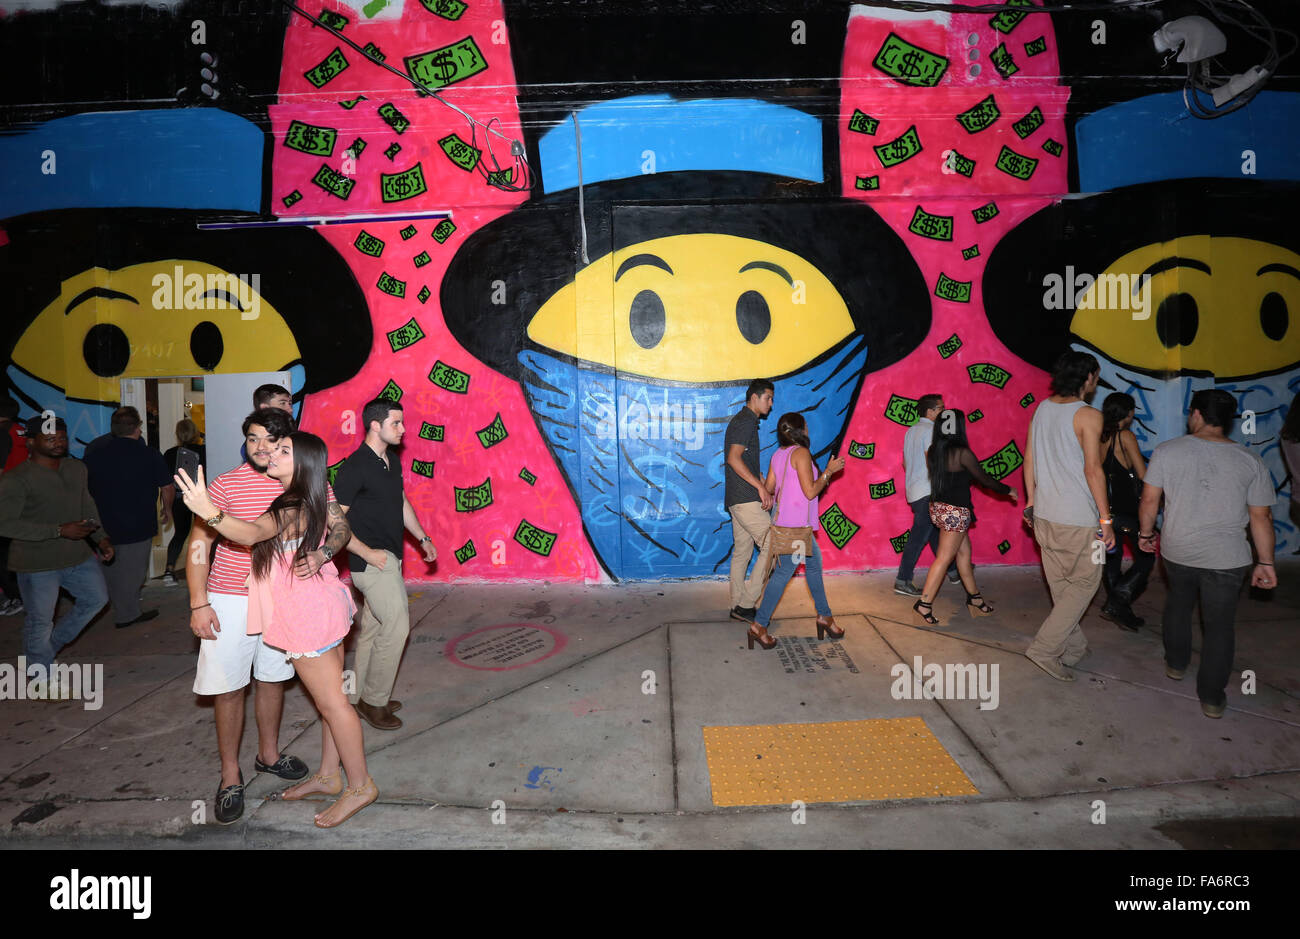 People tour art galleries in the Wynwood Arts District during Art Basel Miami.  (Photo by Sean Drakes/Alamy) Stock Photo